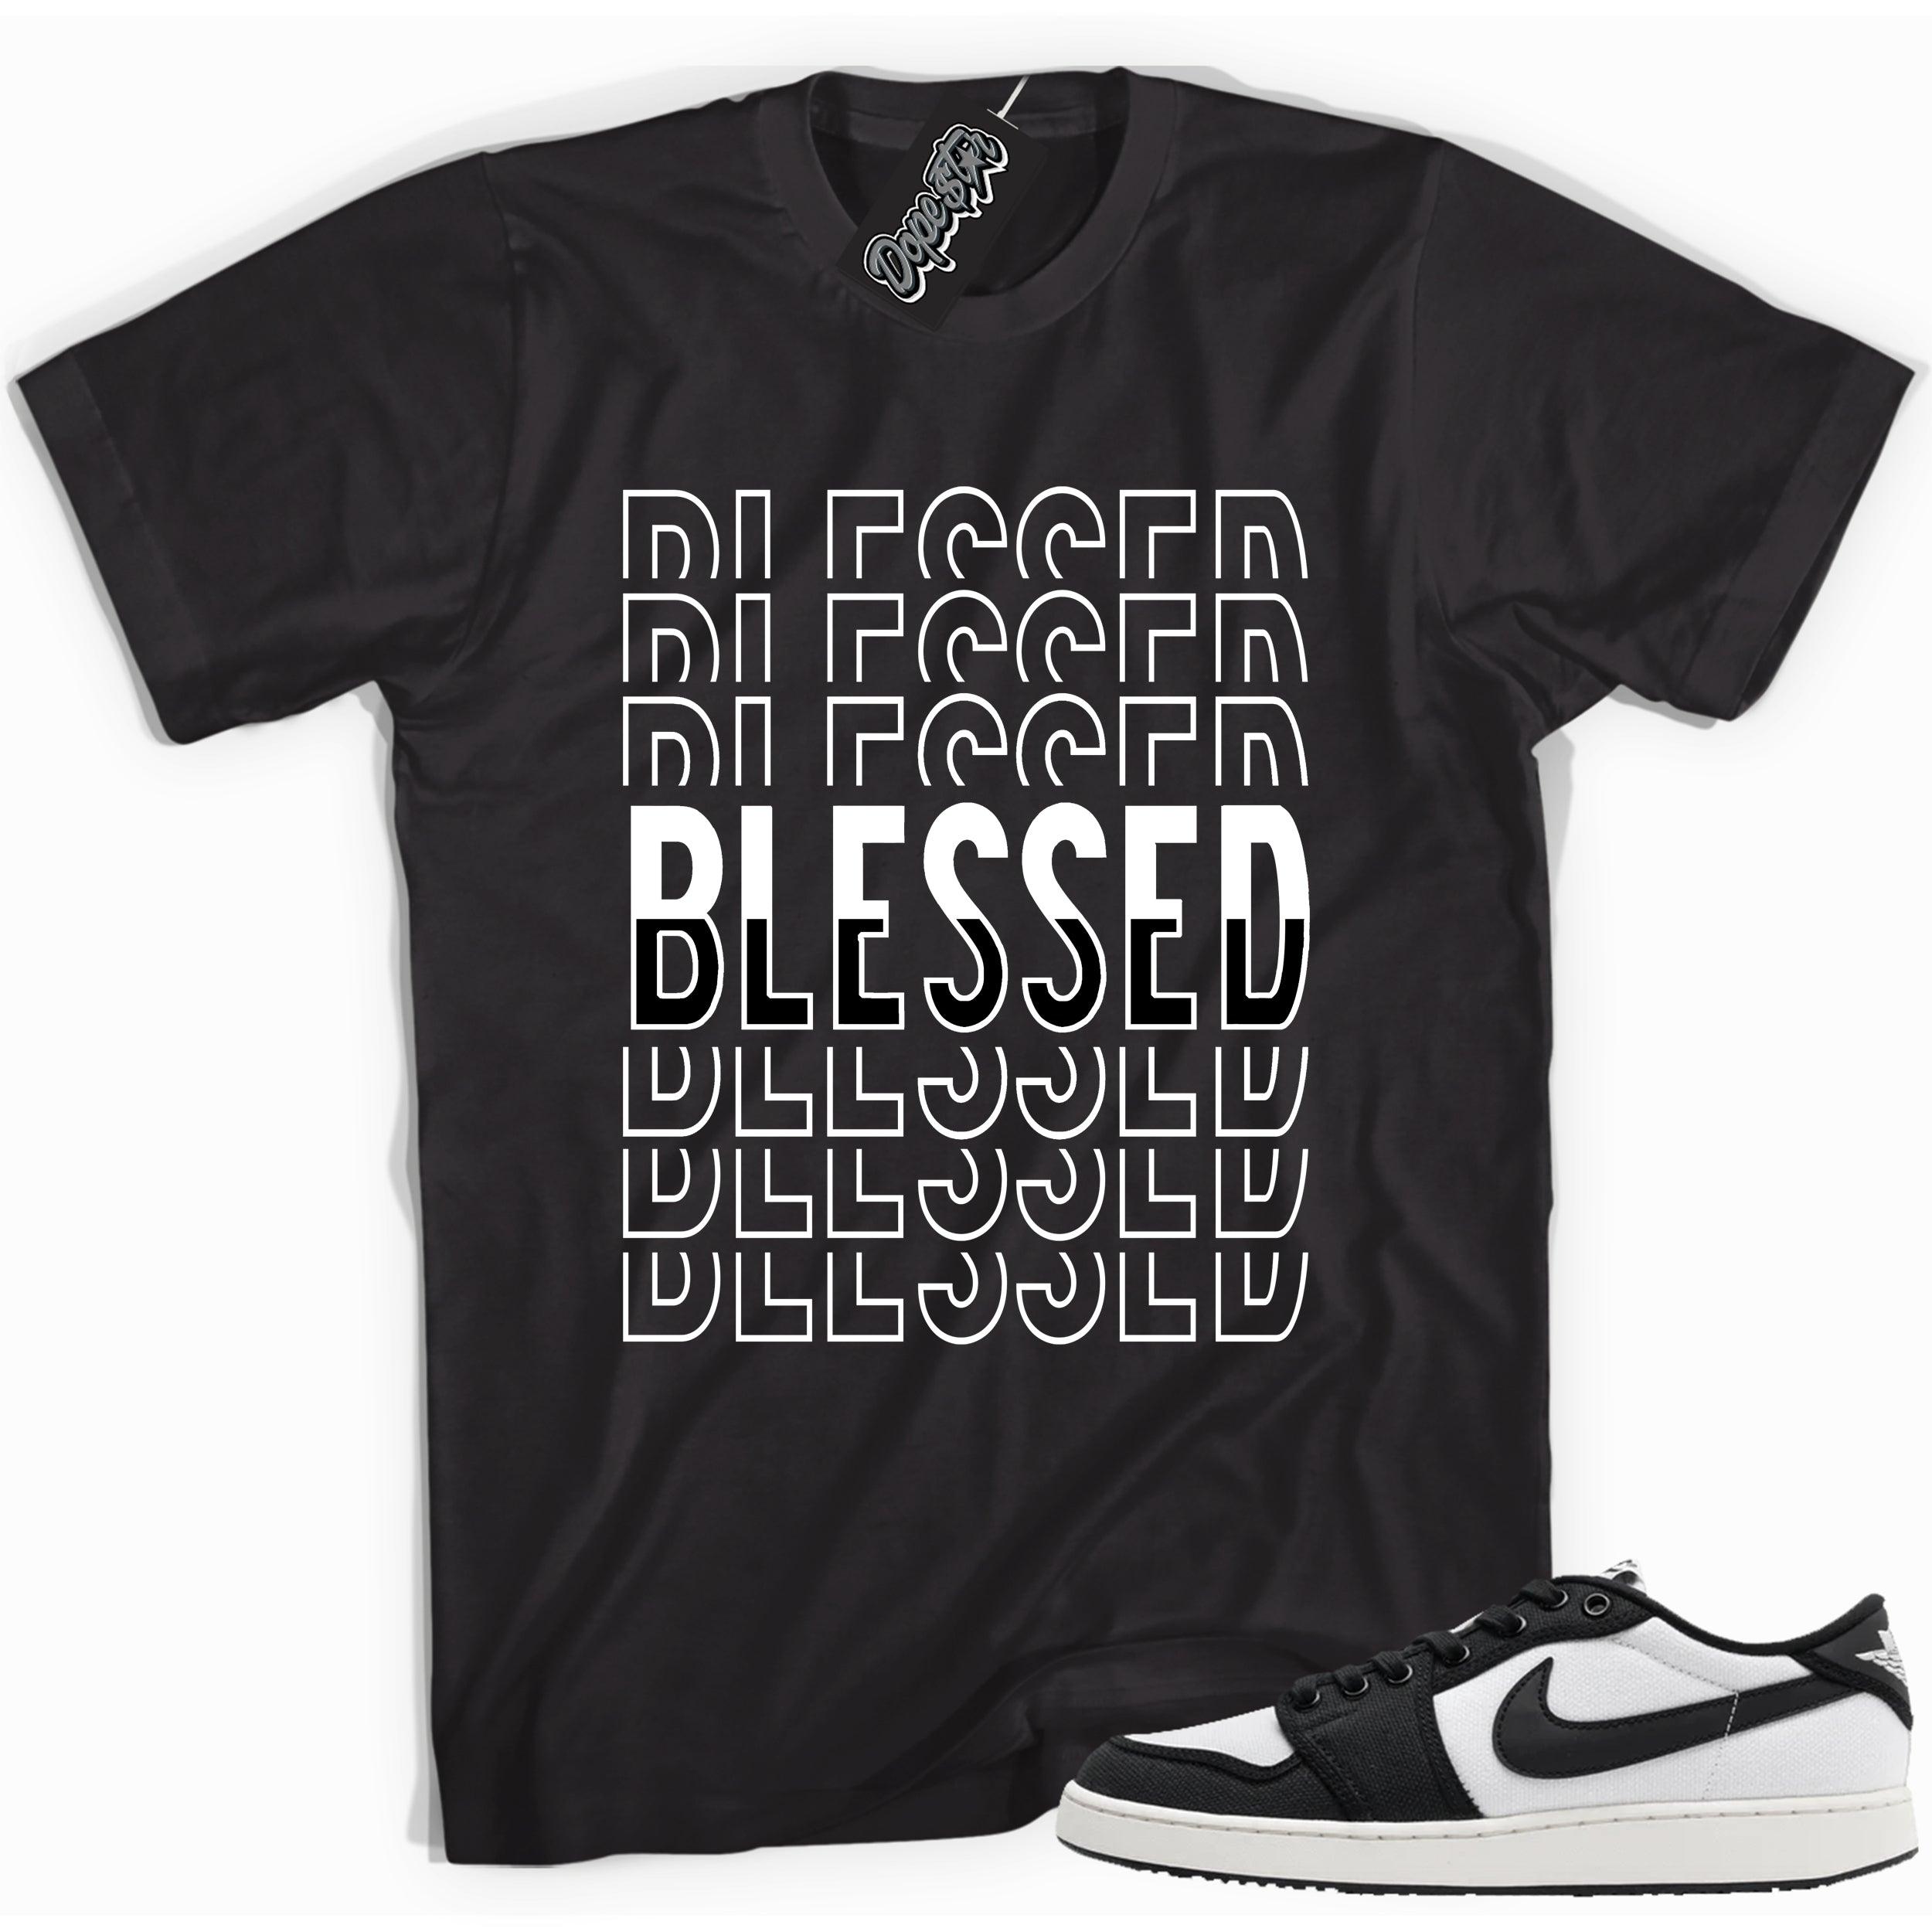 Cool black graphic tee with 'blessed' print, that perfectly matches Air Jordan 1 Retro Ajko Low Black & White sneakers.